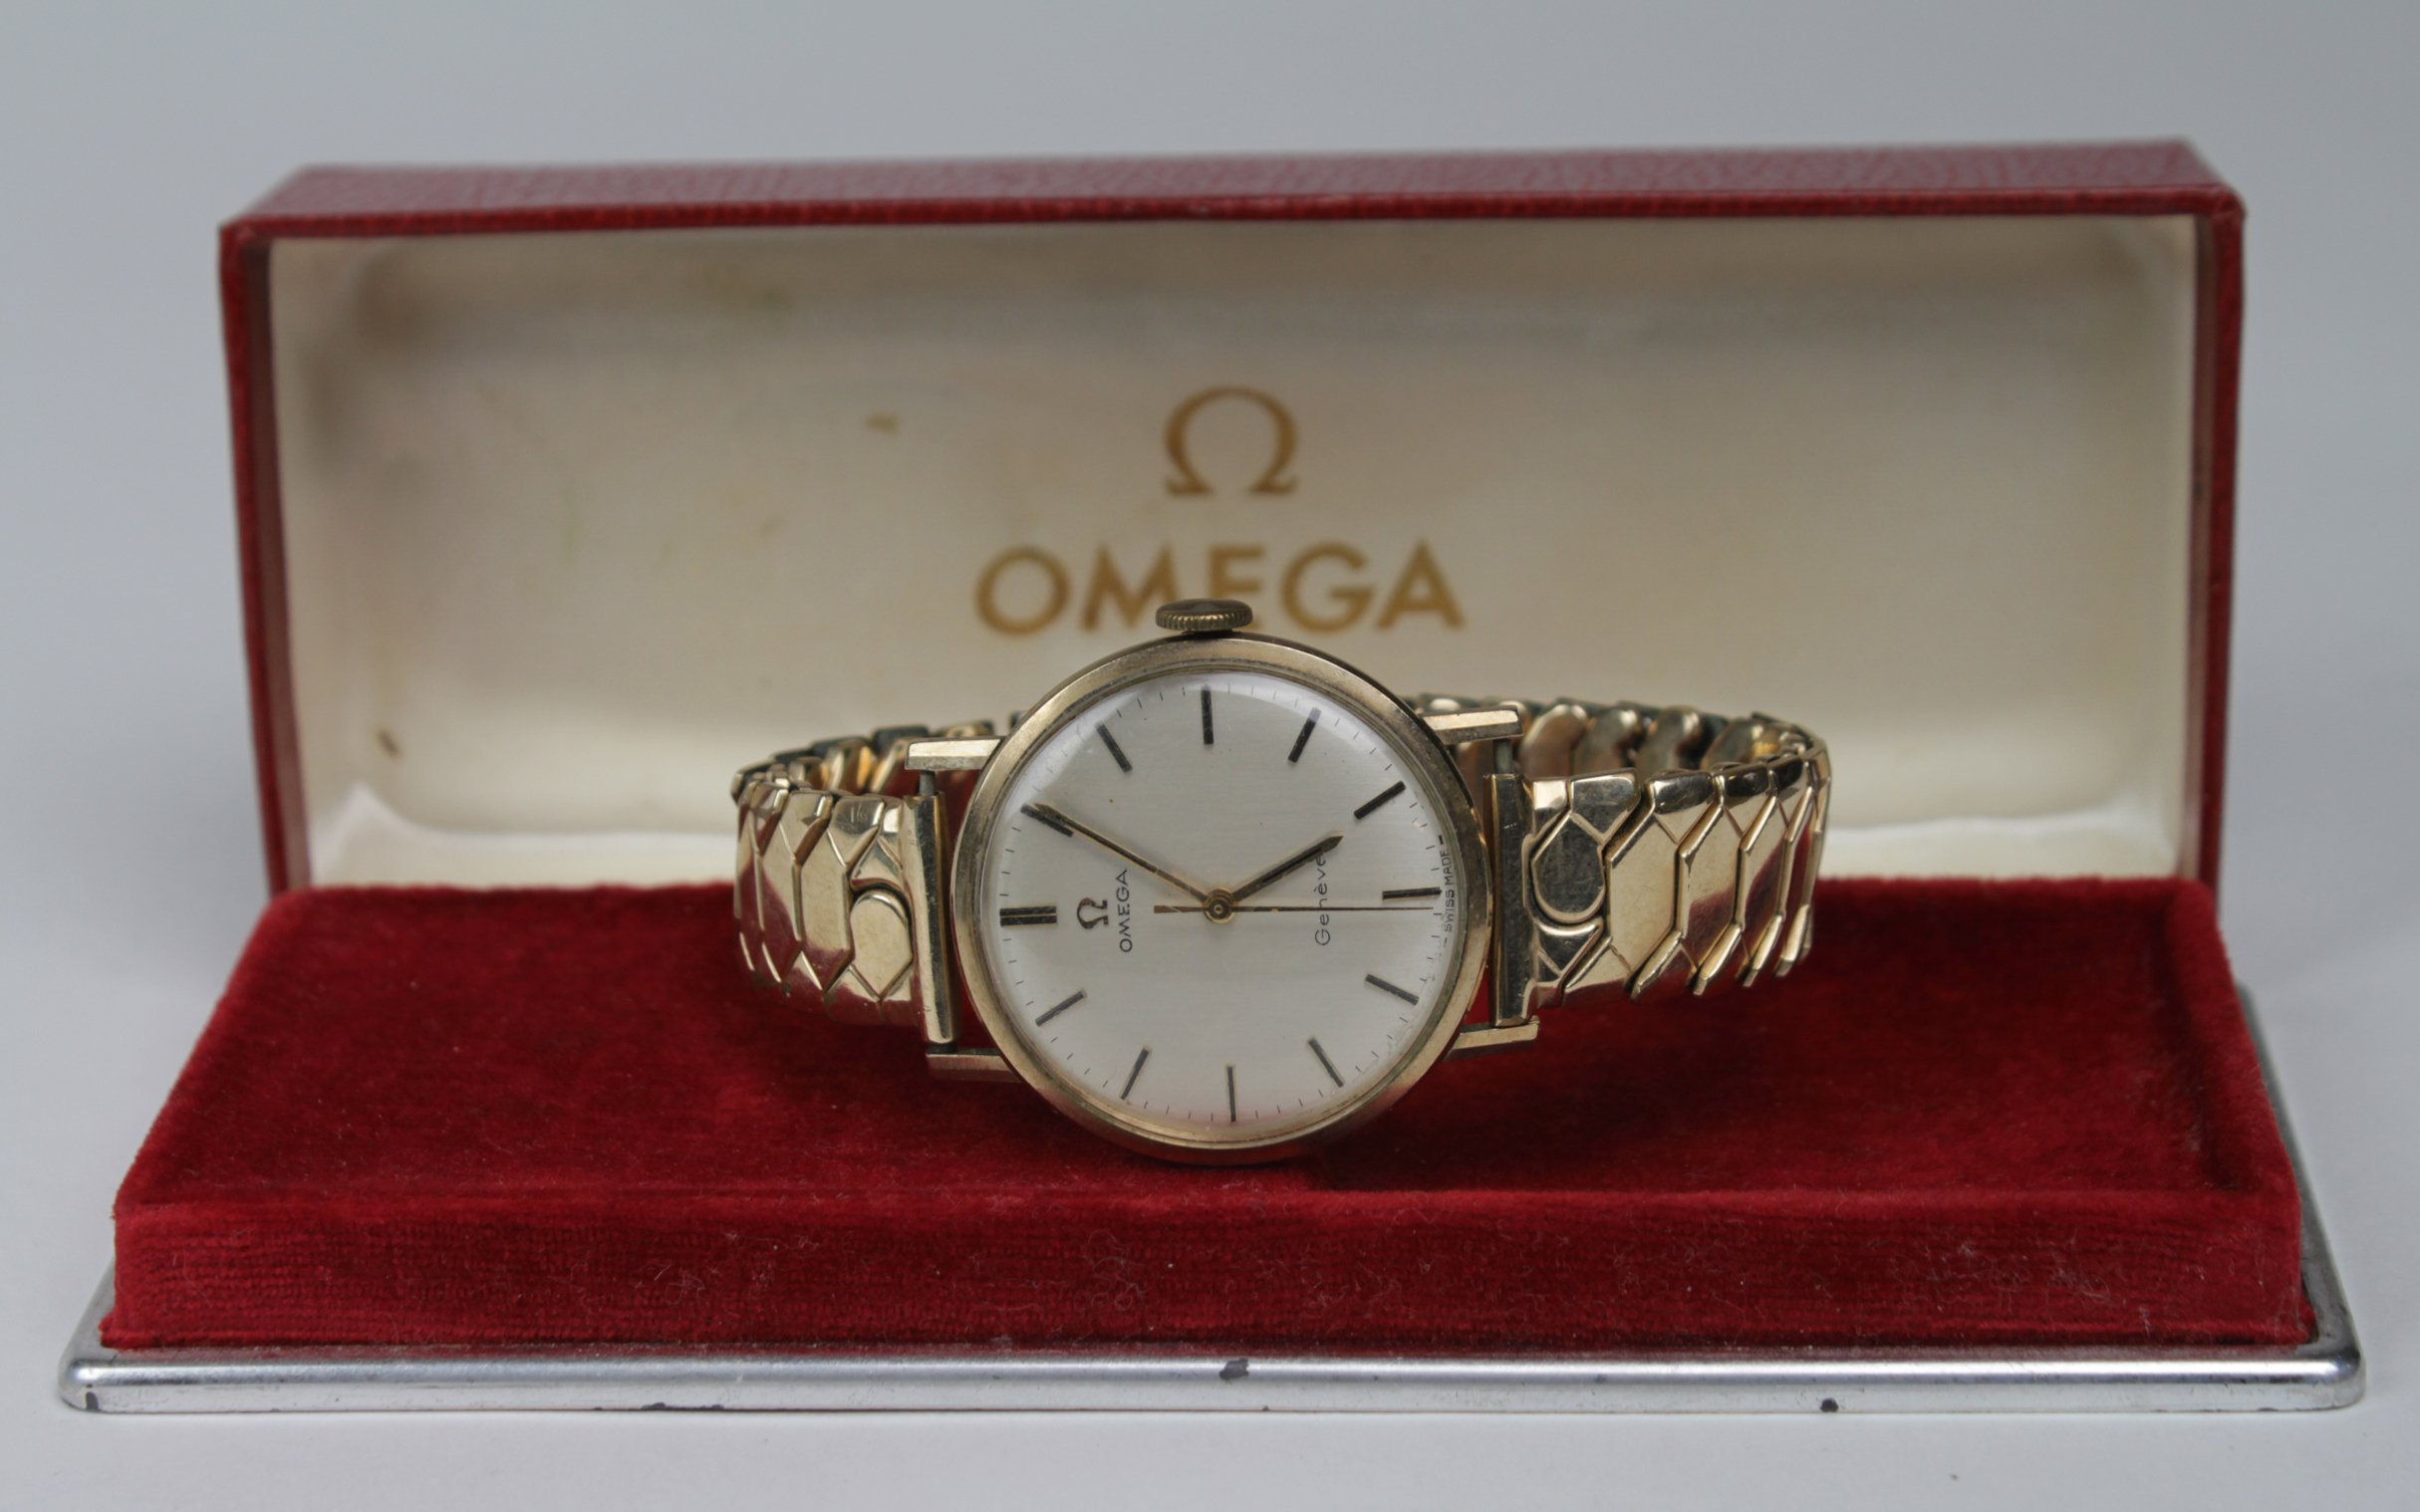 Boxed gents 9ct cased Omega Geneve wristwatch, hallmarked Birmingham 1970 (Serial number